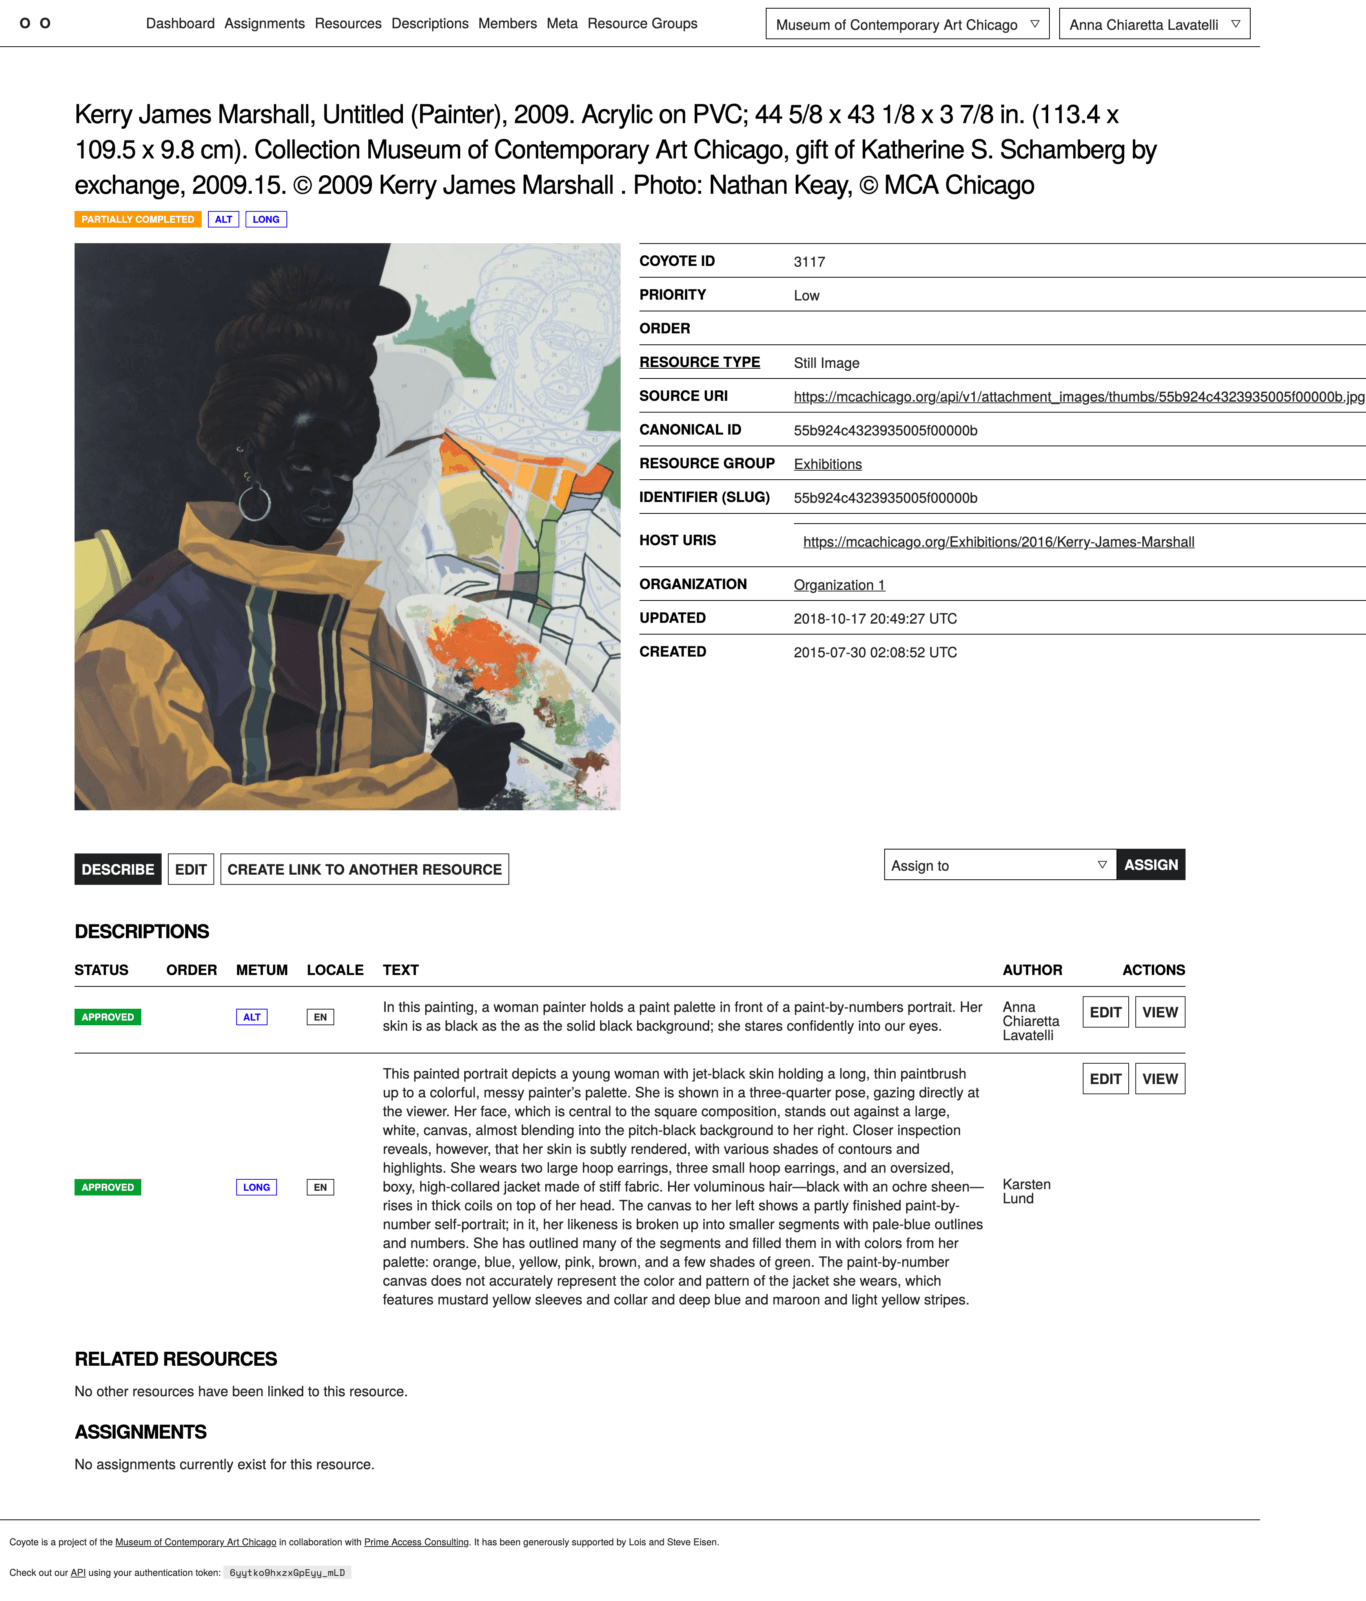 A screenshot of the Coyote software displaying a portrait painting by Kerry James Marshall and its accompanying descriptions.